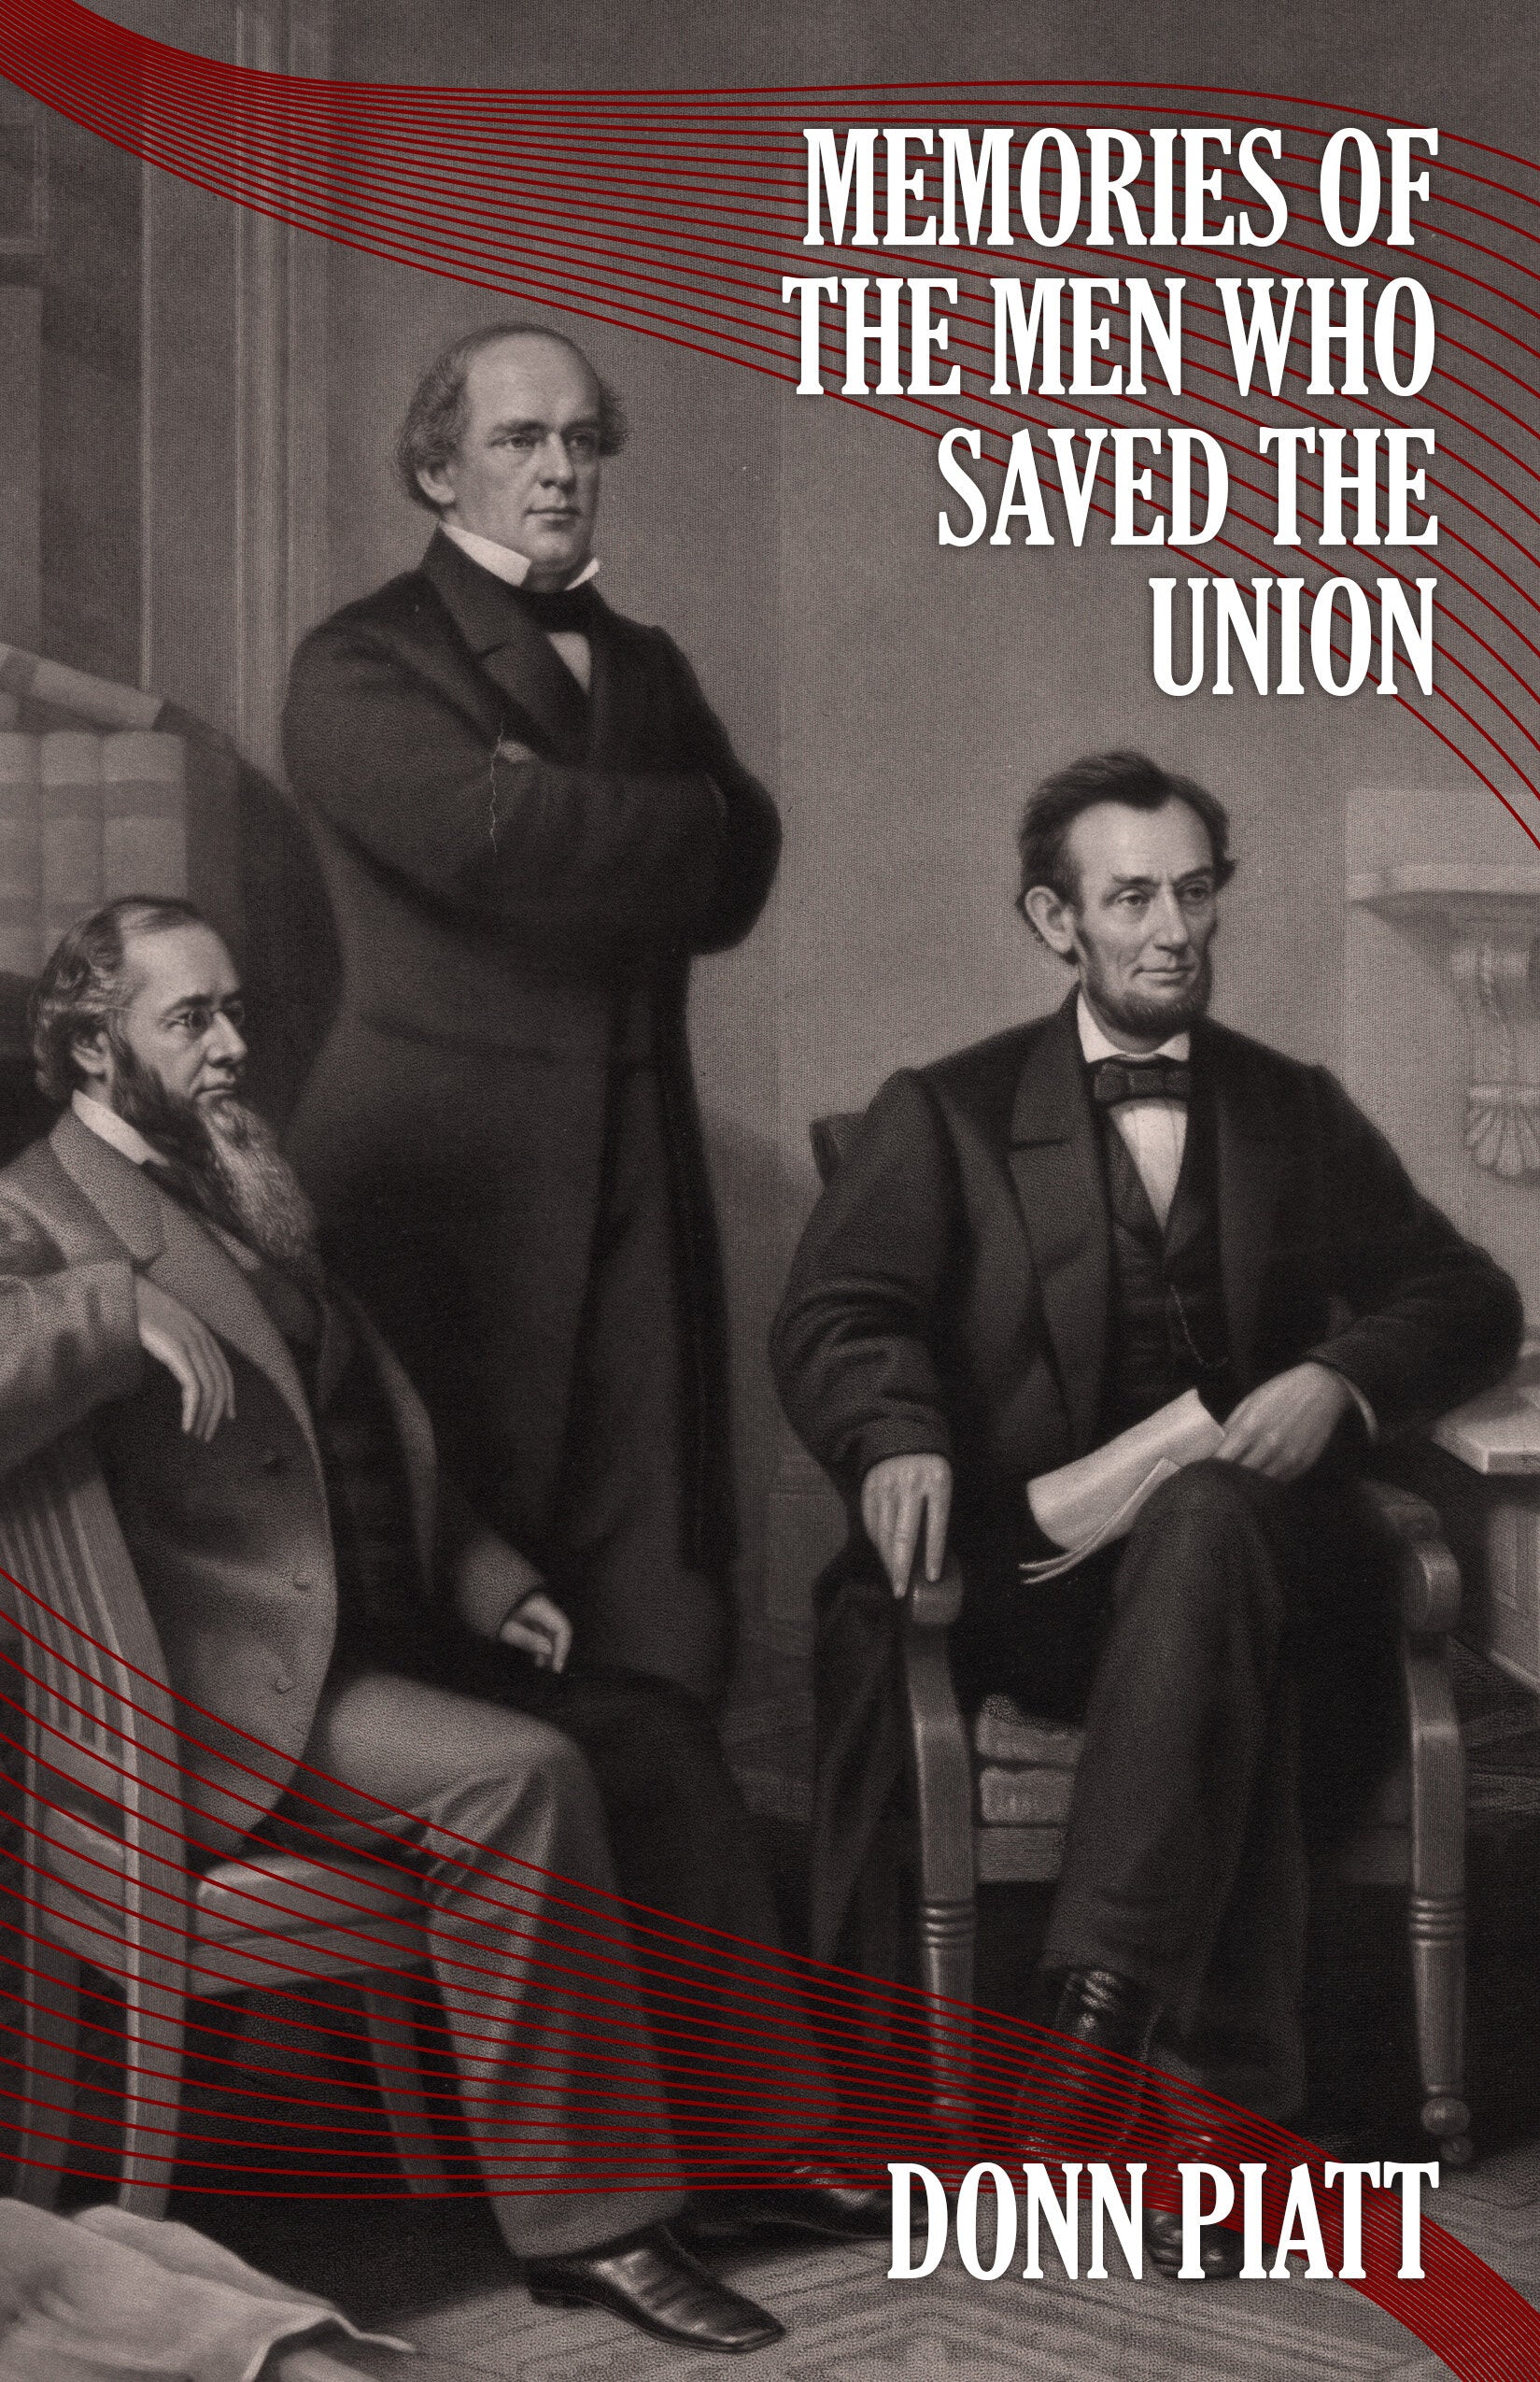 Memories of the Men Who Saved the Union